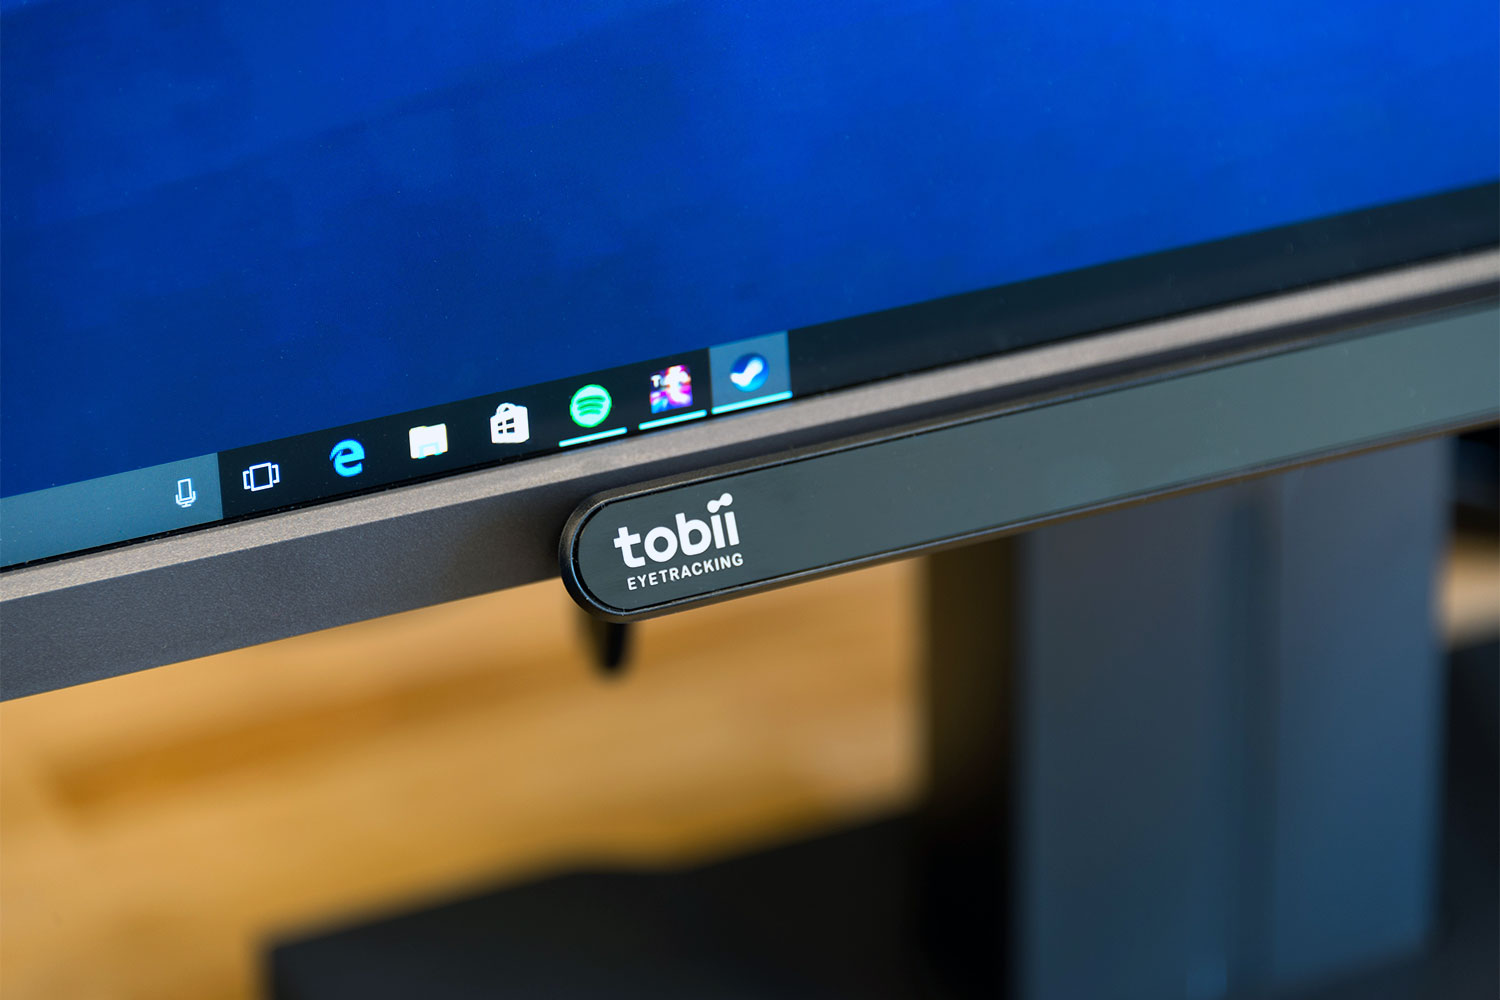 Tobii eye tracking products enhance your gaming experience - Tobii